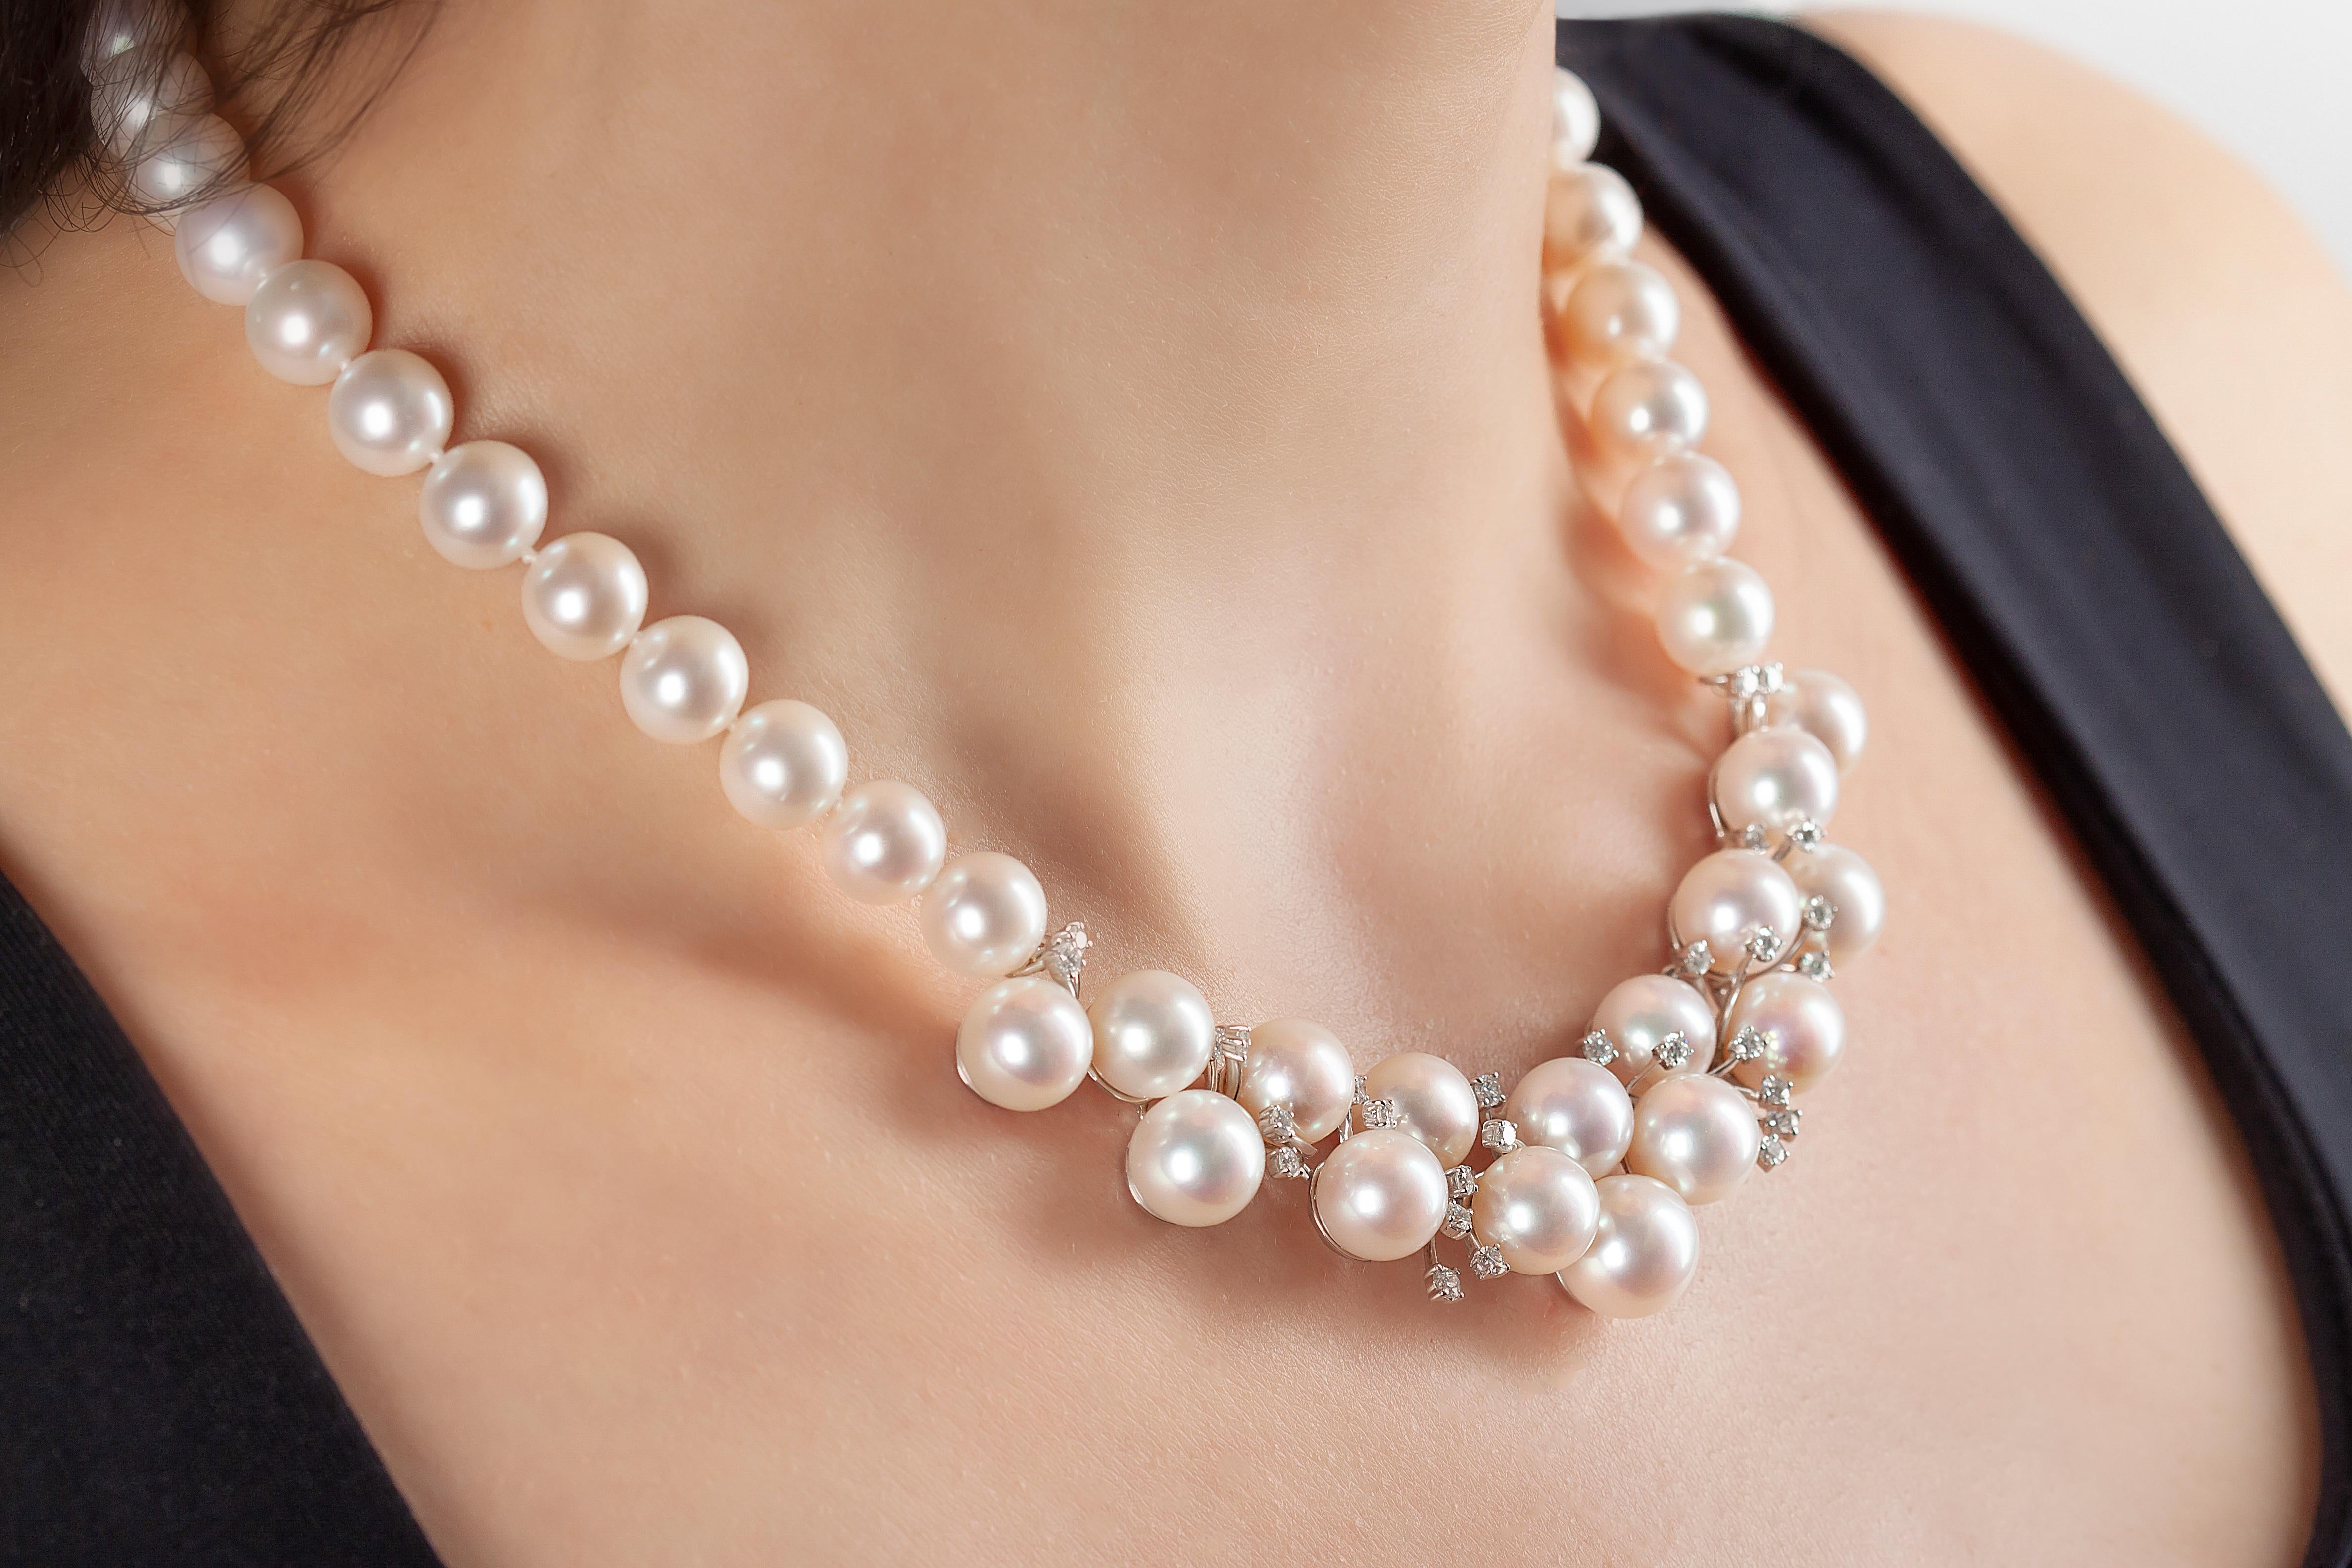 This sumptuous necklace by Yoko London offers a contemporary twist to a classic pearl strand. A row of expertly matched Freshwater pearls culminates in an elegant scattering of pearls and diamonds. Designed and hand-crafted in our London atelier,